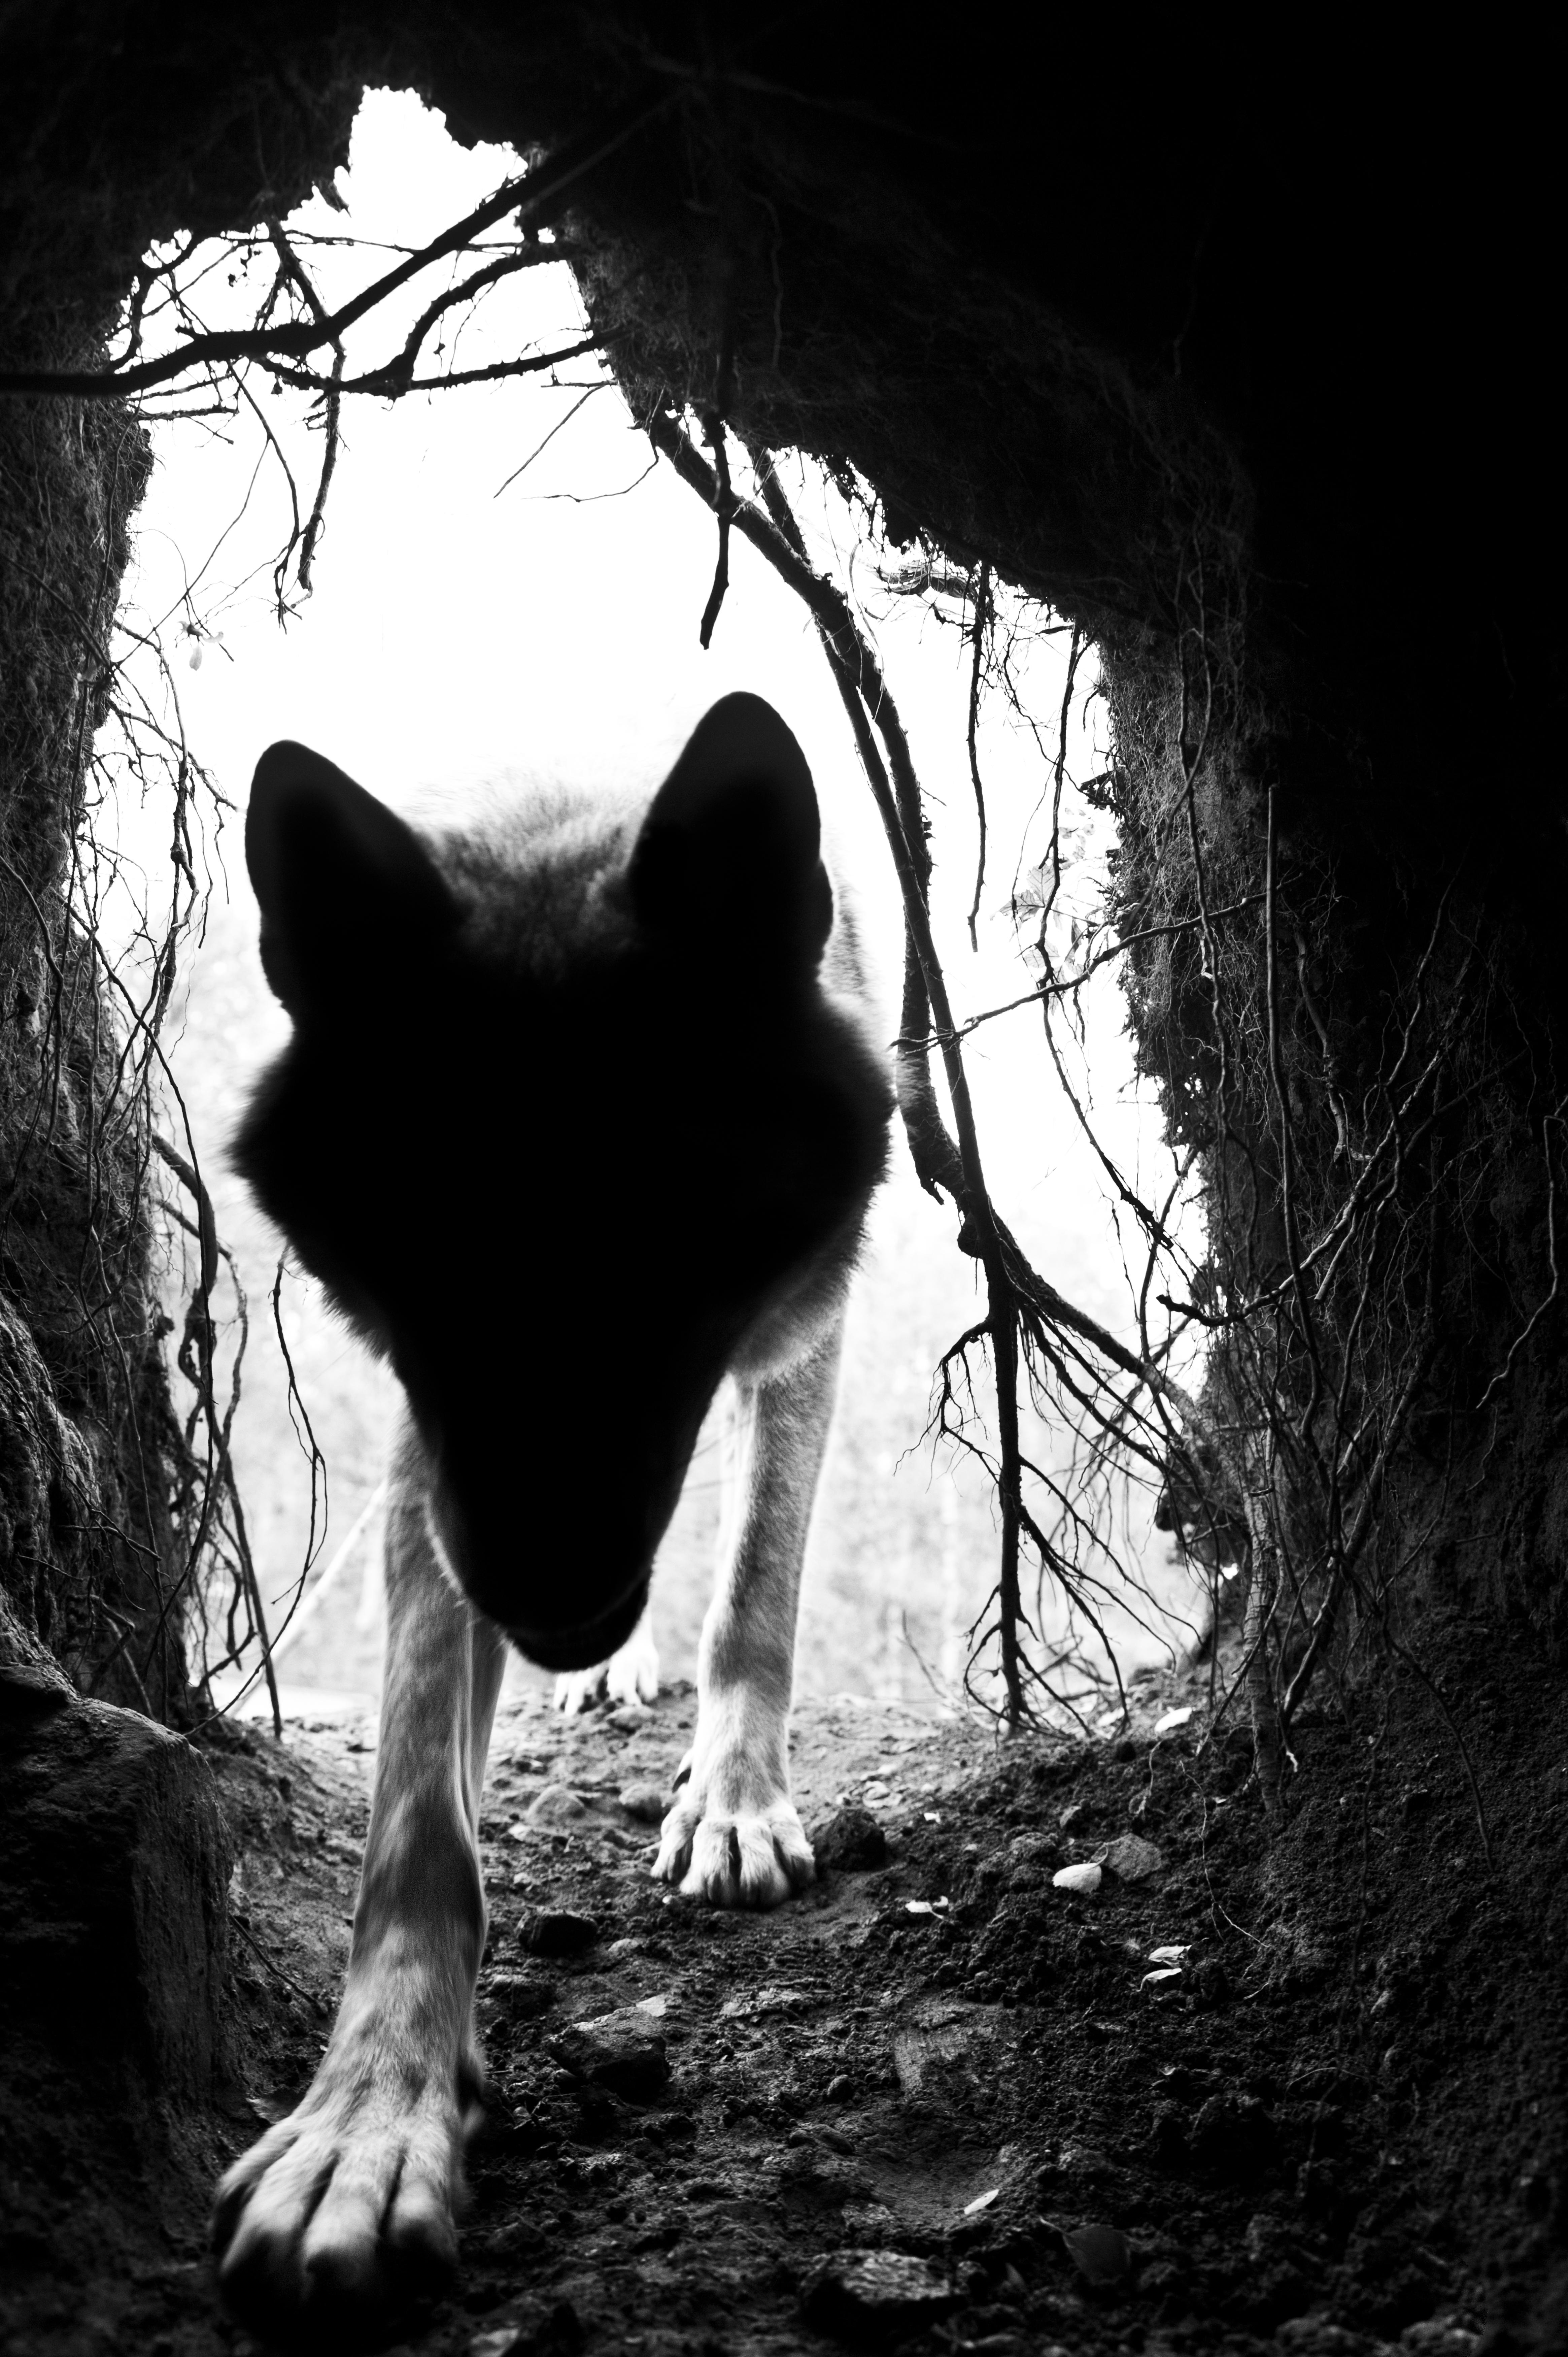 "Untitled 13"-Shadow Within-nature wolf animal b/w